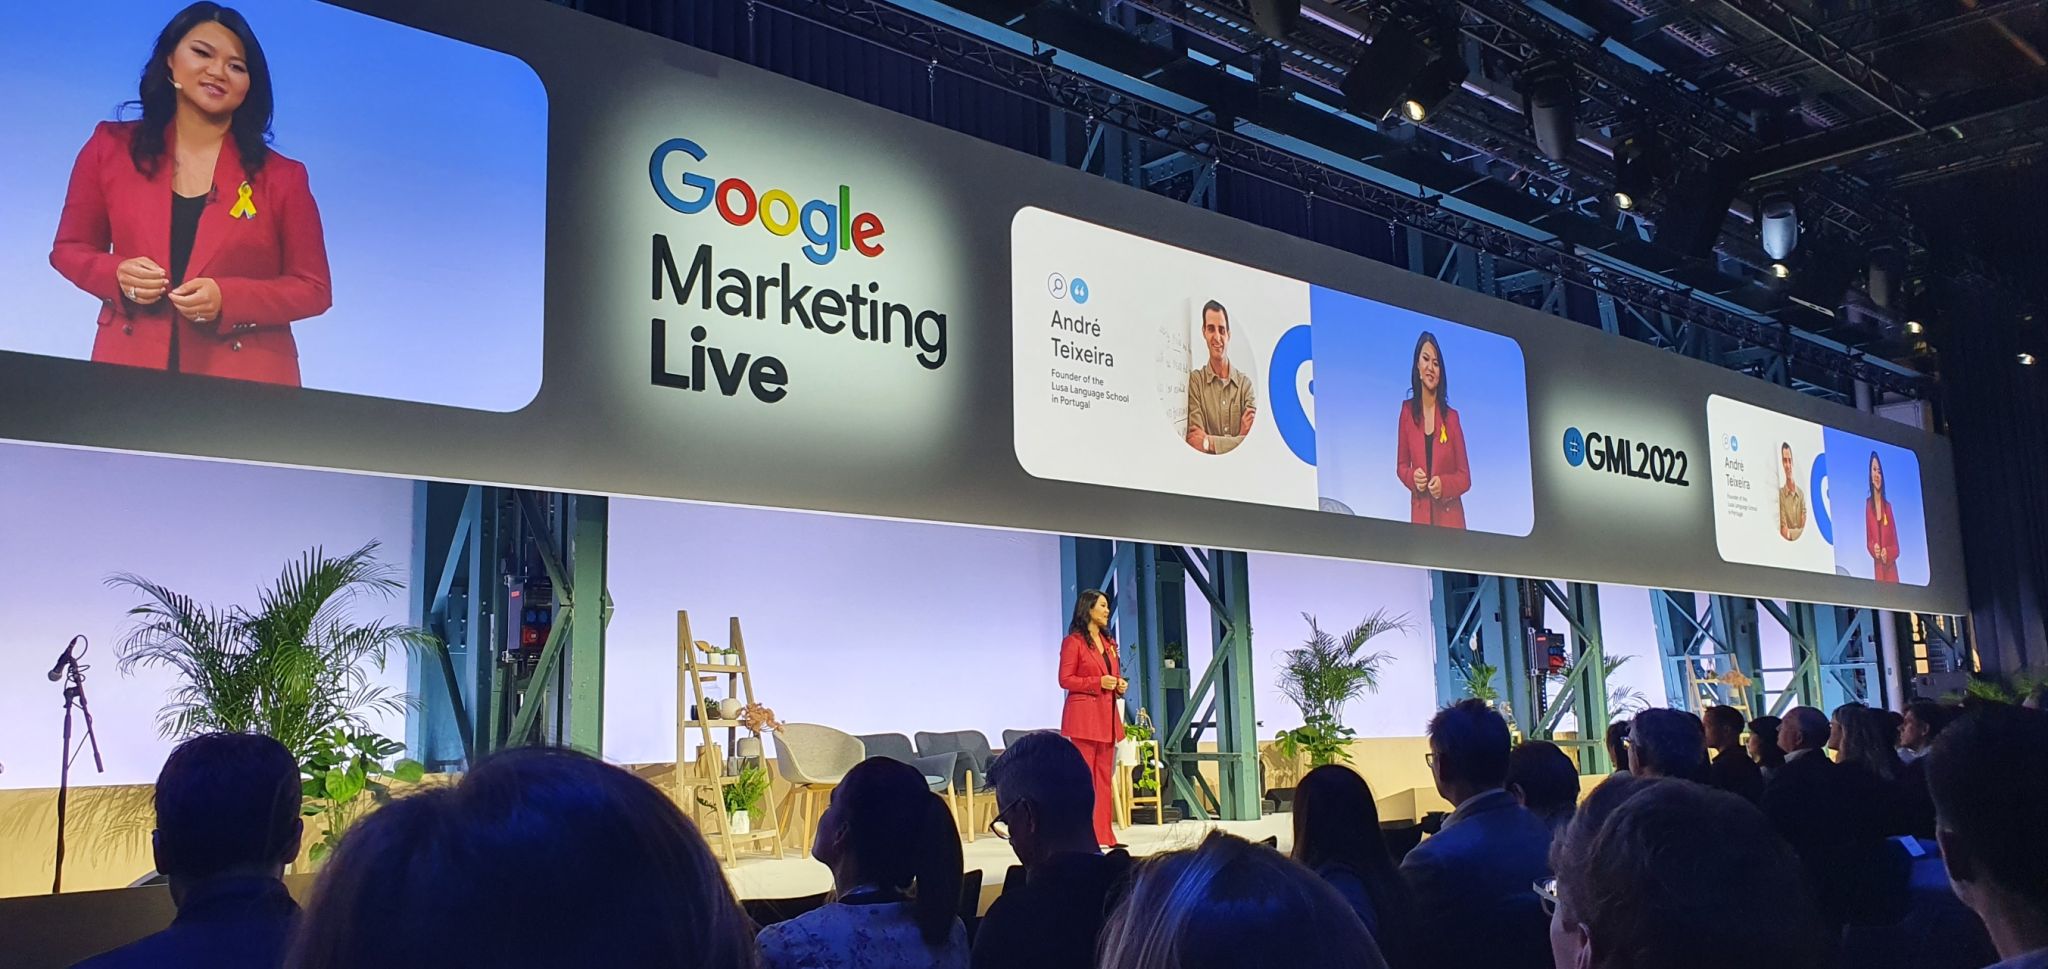 Save the date for Google Marketing Live 2022